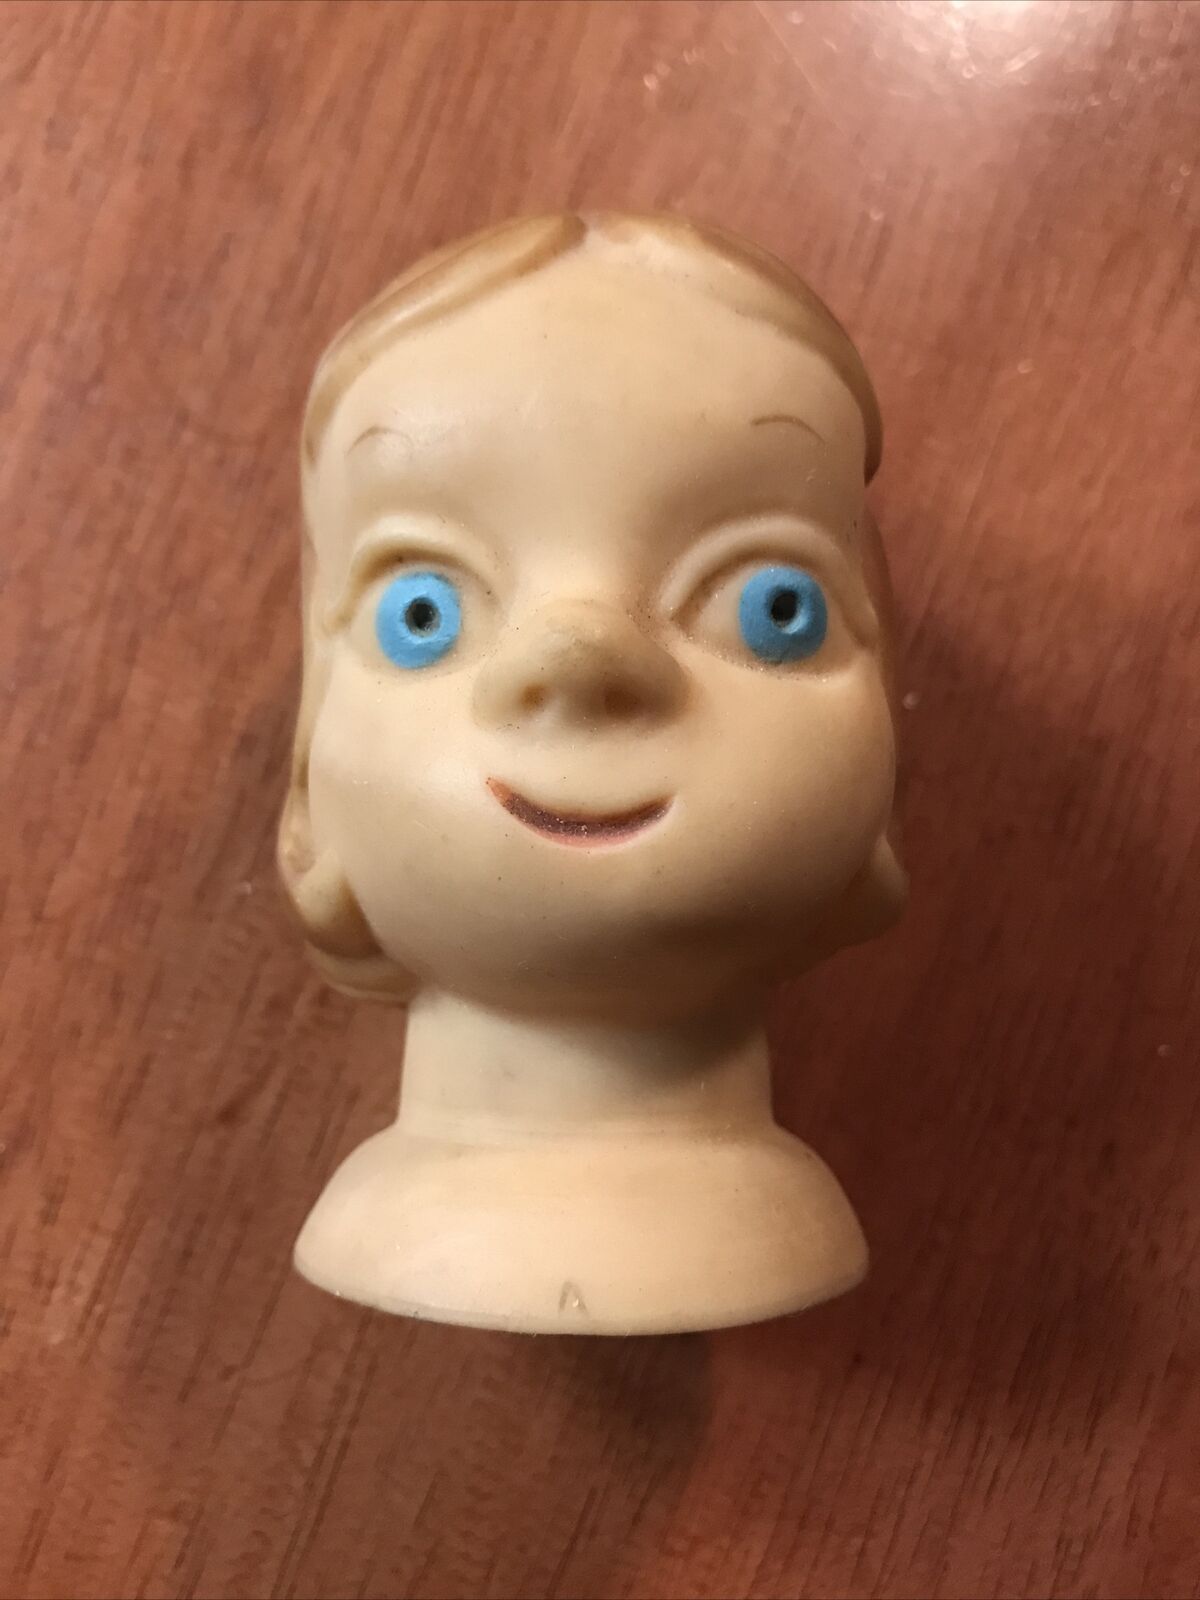 Vintage 1950s Doll Head Rubber 3” Squeeze Toy Cartoon Character Hand Puppet Vg